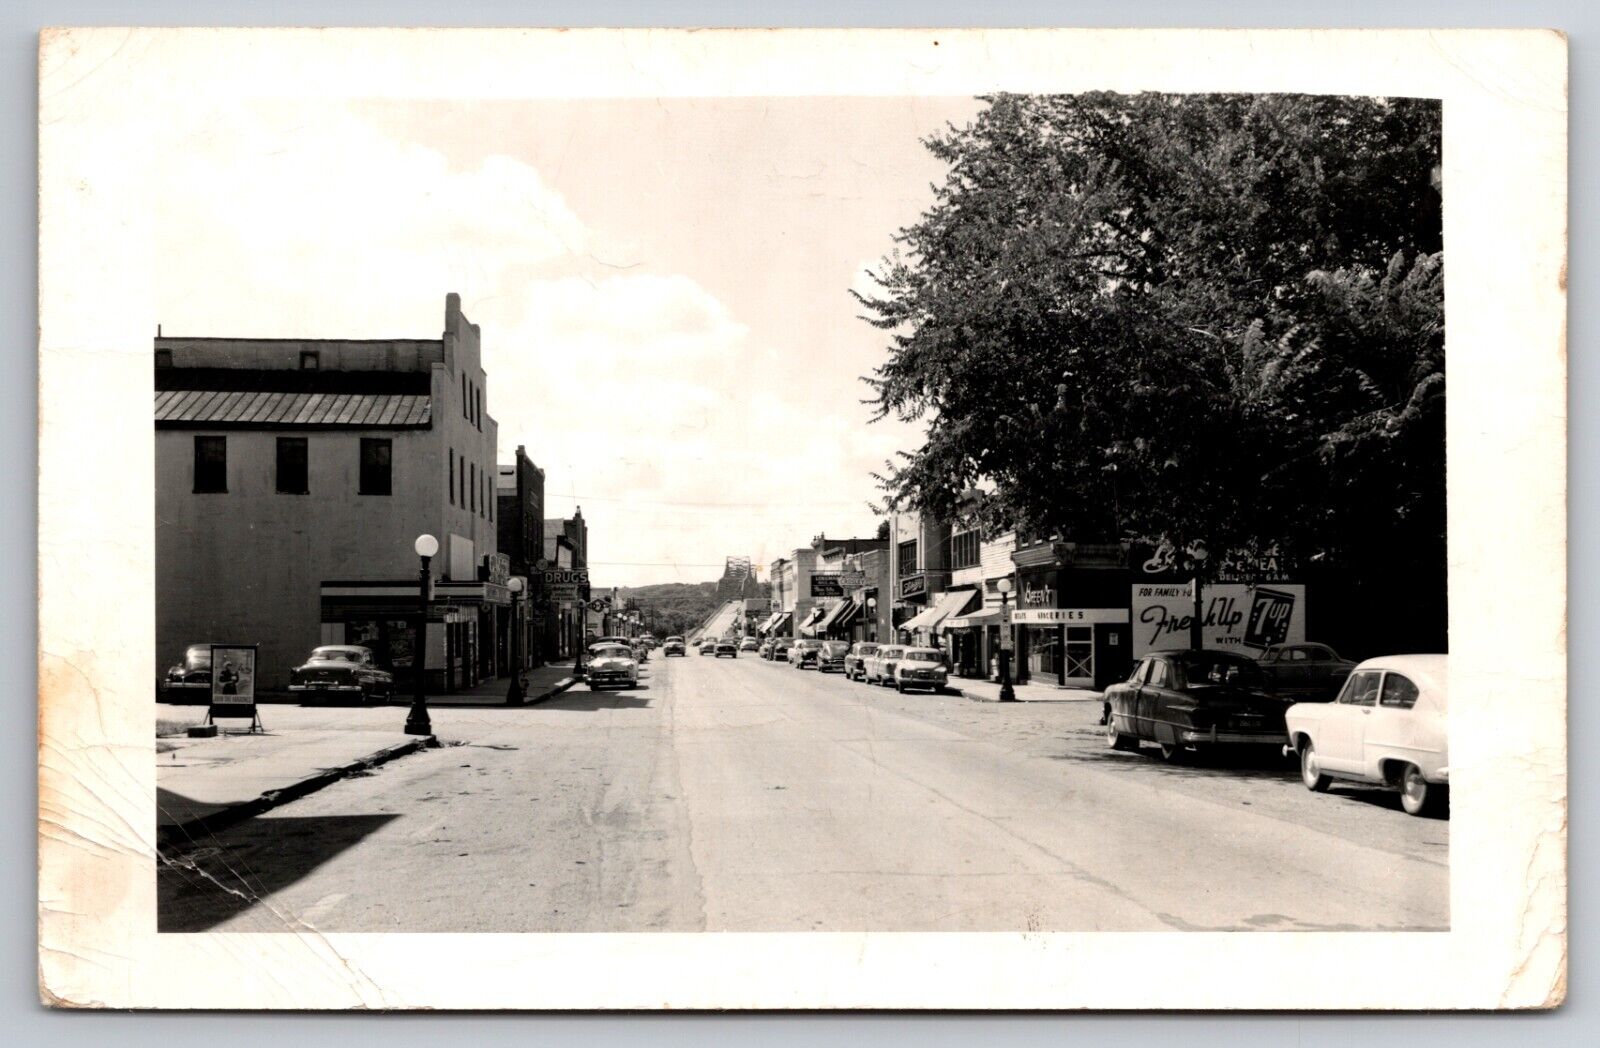 Fifth Street Lacon Illinois IL 7-Up Advertising Sign 1955 Real Photo RPPC